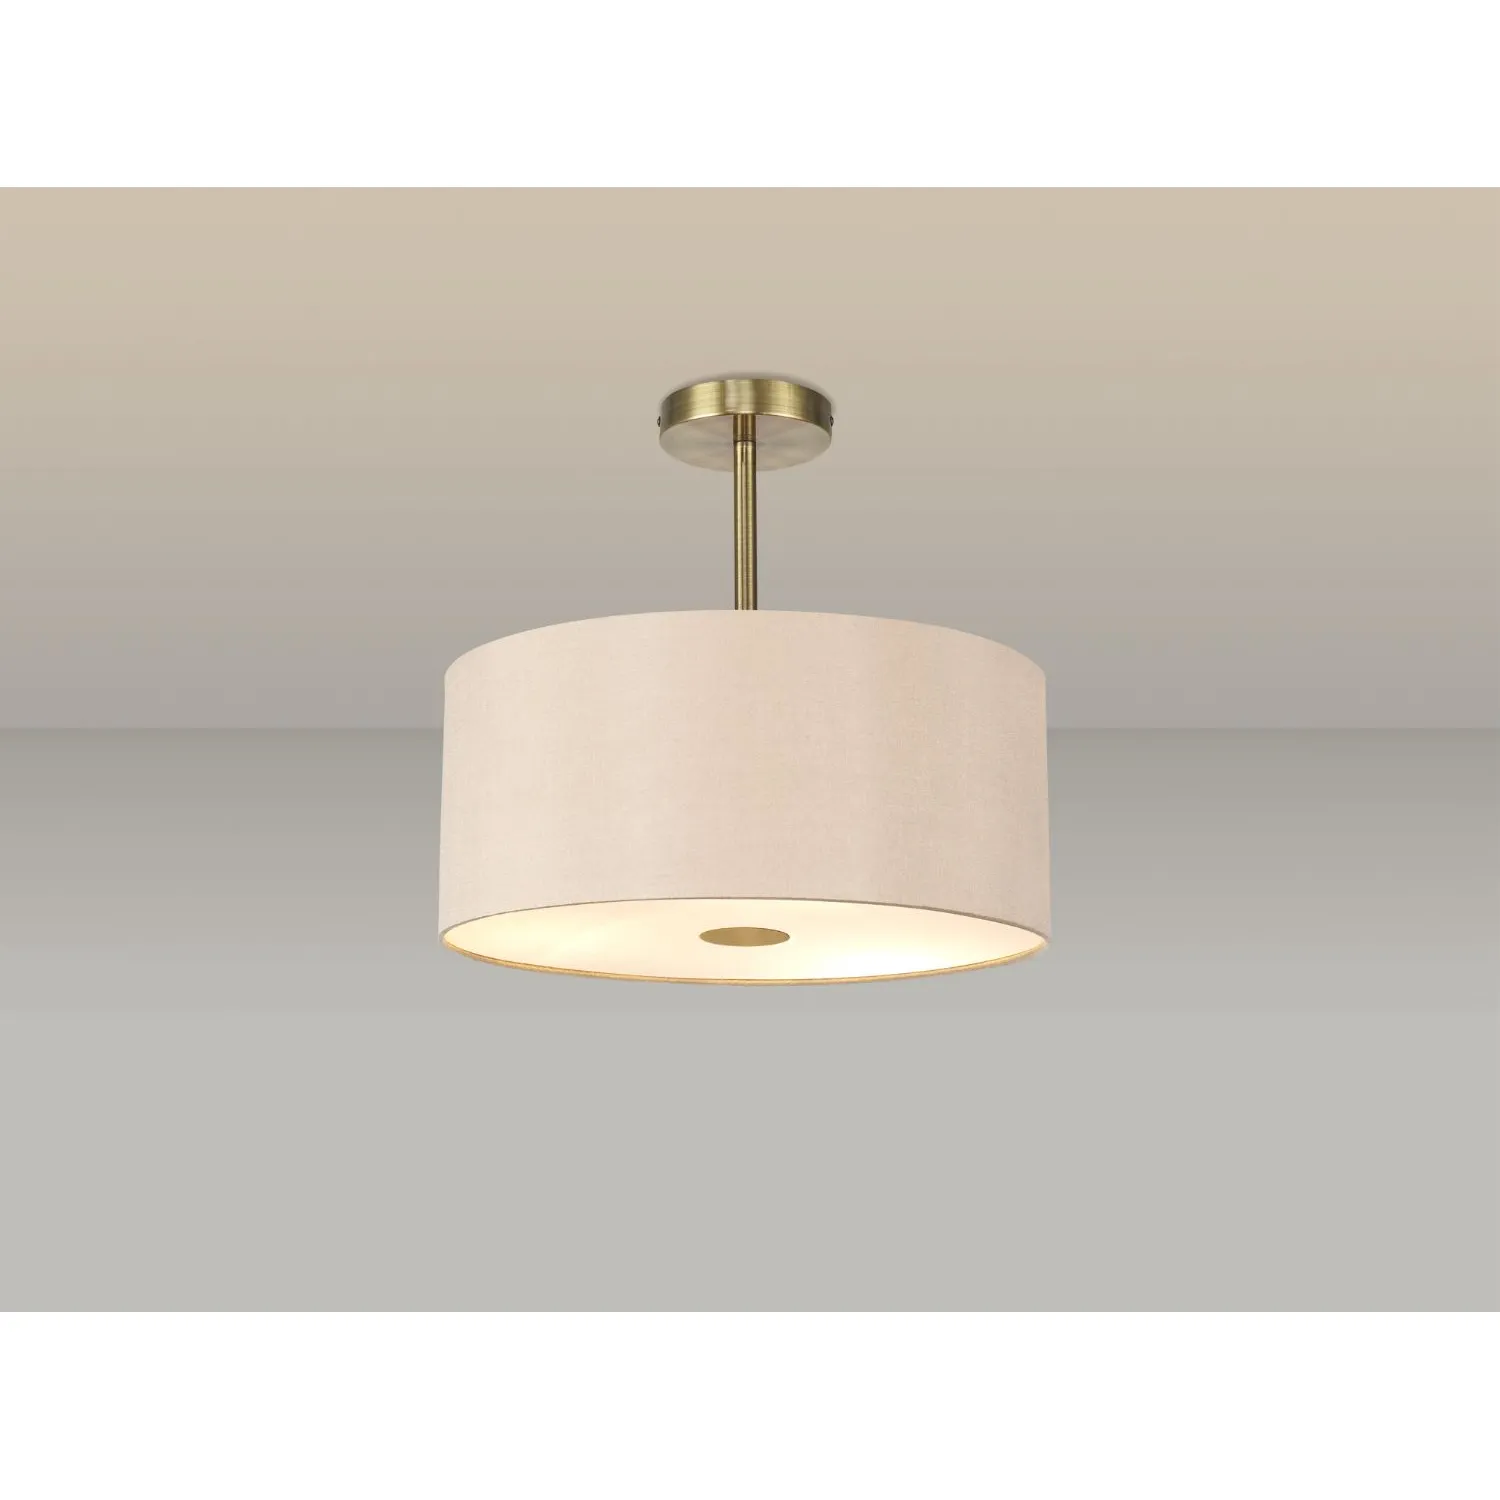 Baymont Antique Brass 5 Light E27 Semi Flush c w 400mm Dual Faux Silk Shade, Antique Gold Ruby And 400mm Frosted AB Acrylic Diffuser